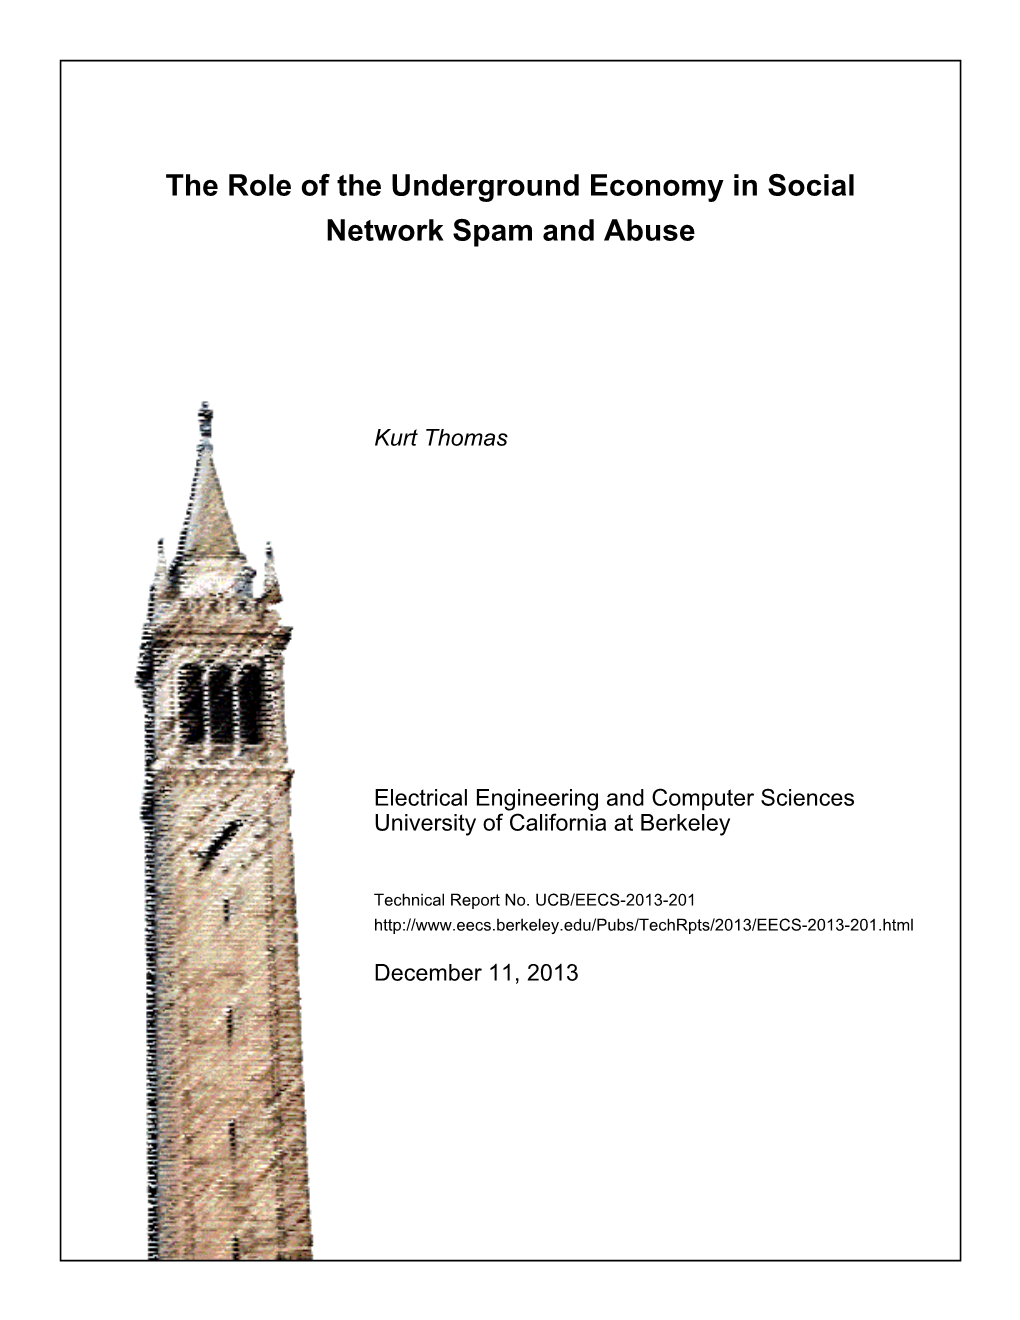 The Role of the Underground Economy in Social Network Spam and Abuse